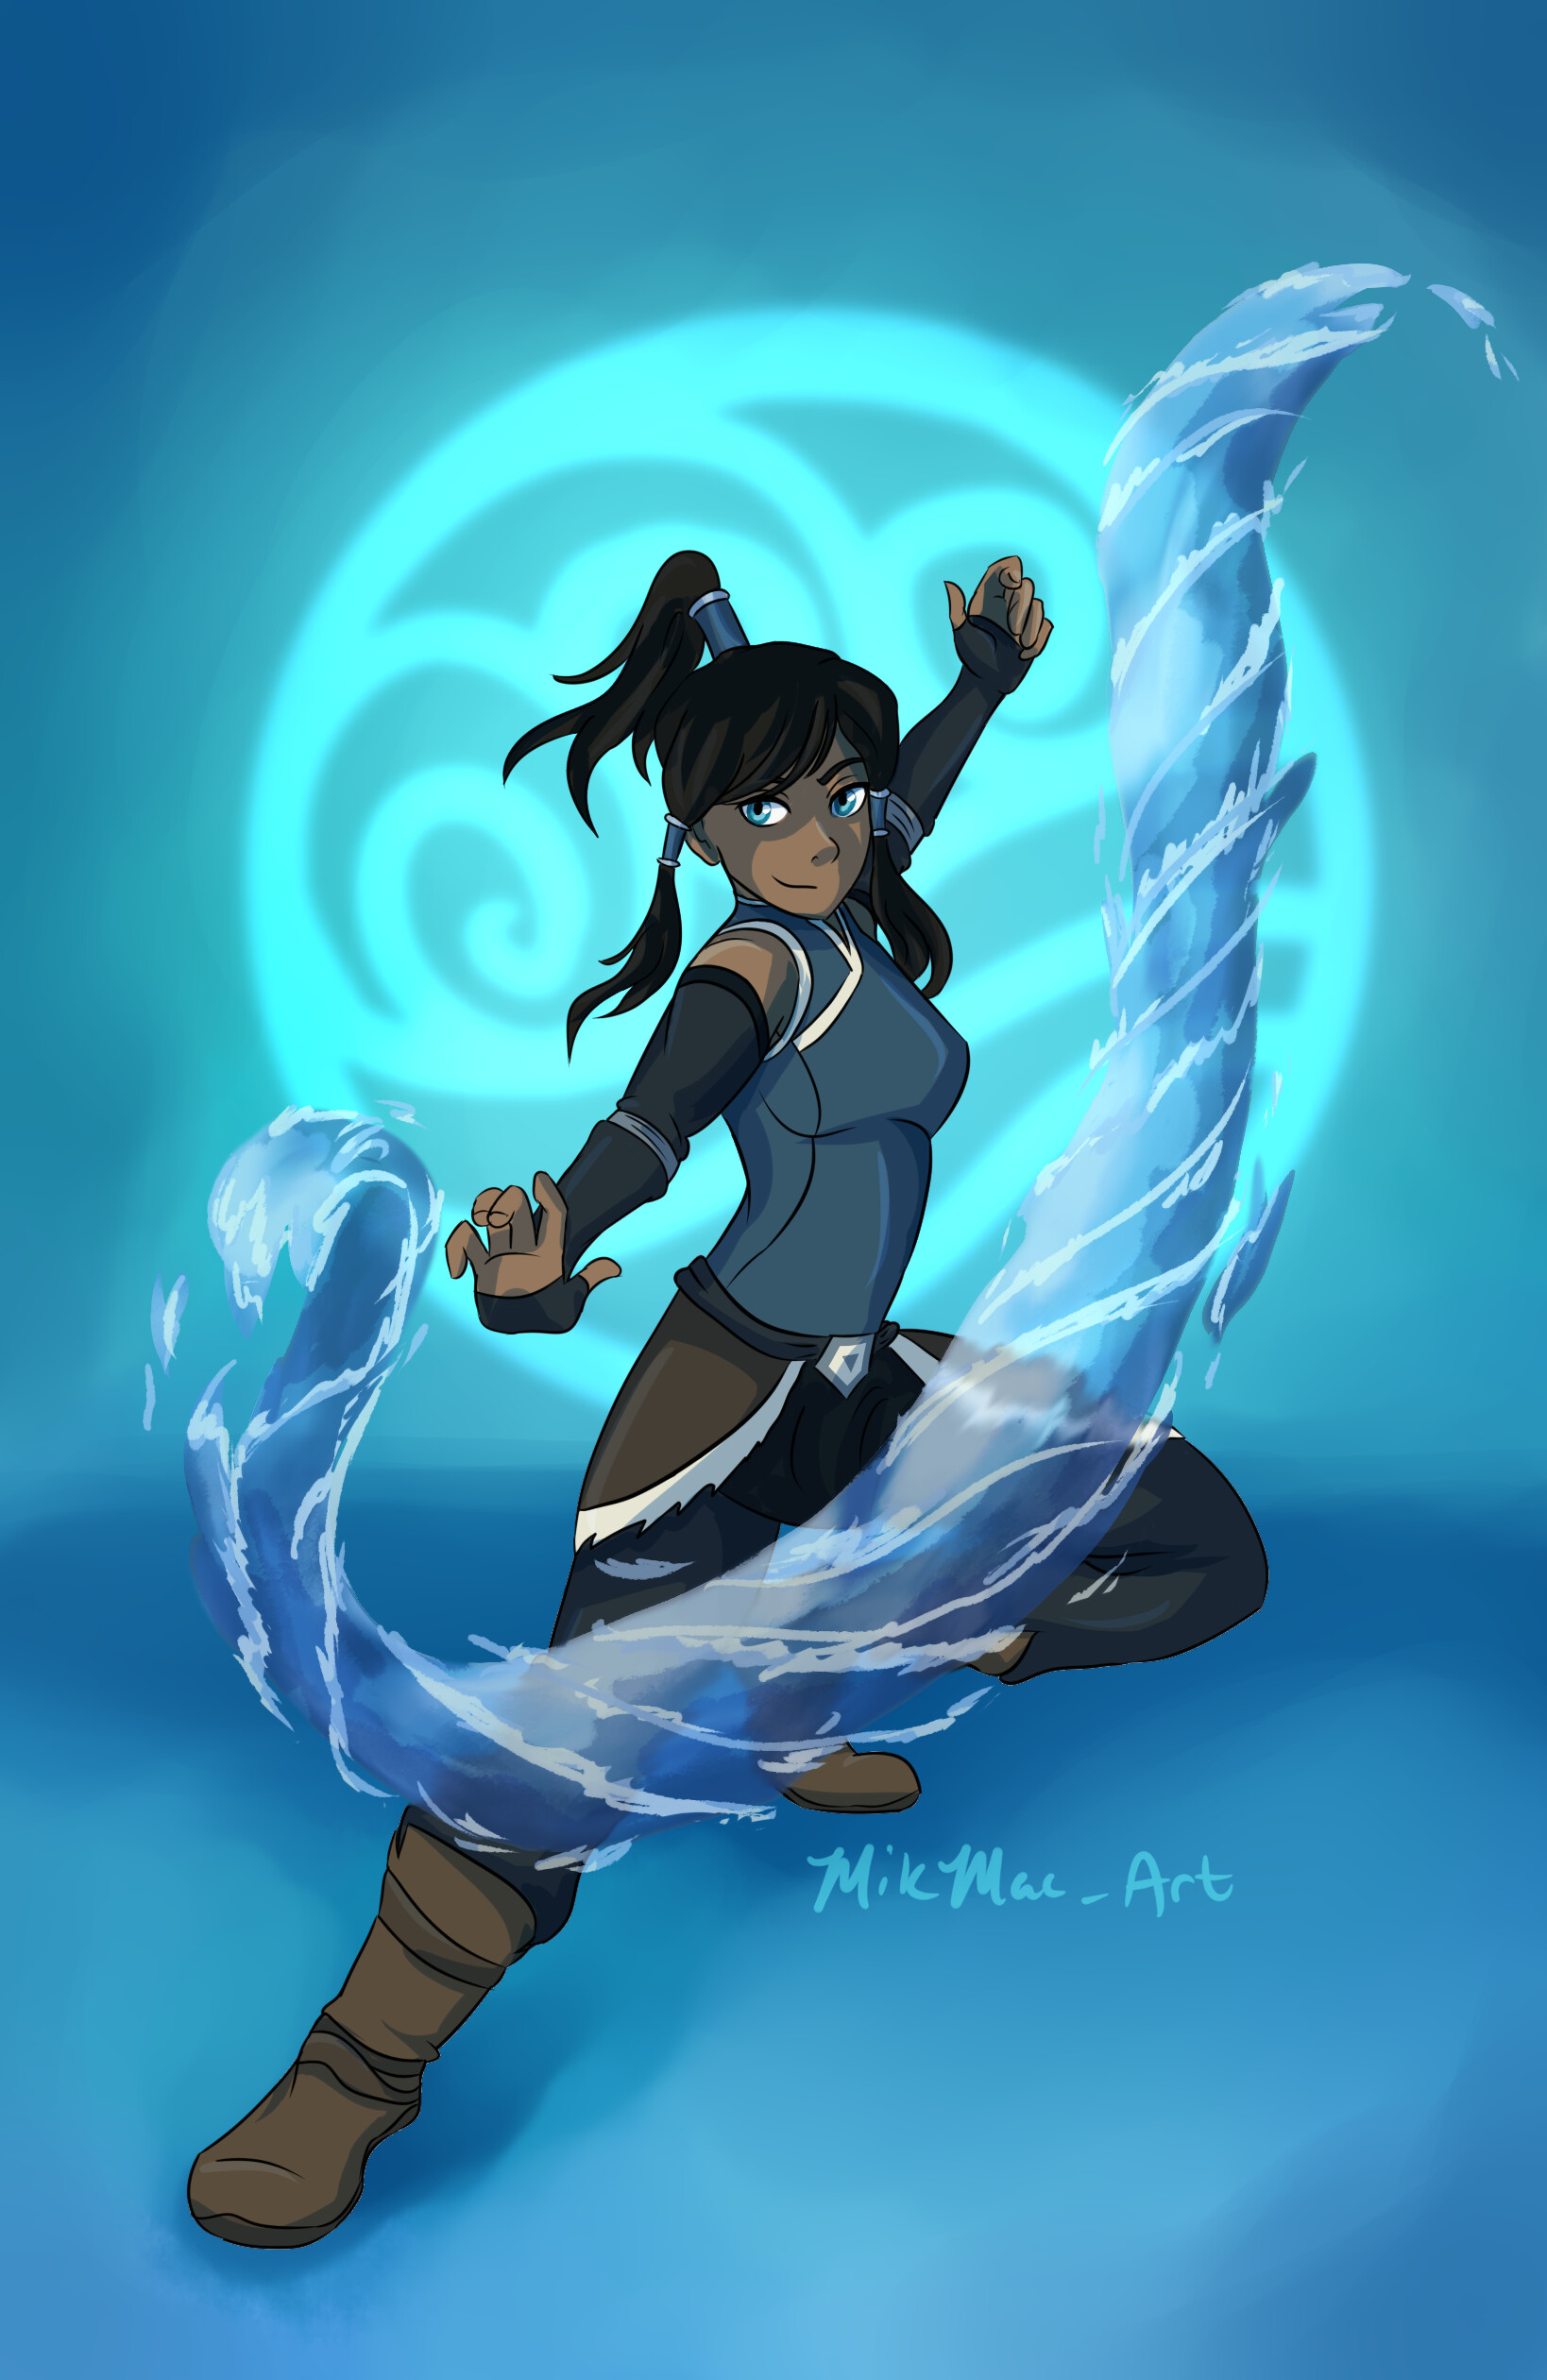 Kataras GREATEST Moments As A Waterbending Master   Avatar The Last  Airbender  YouTube